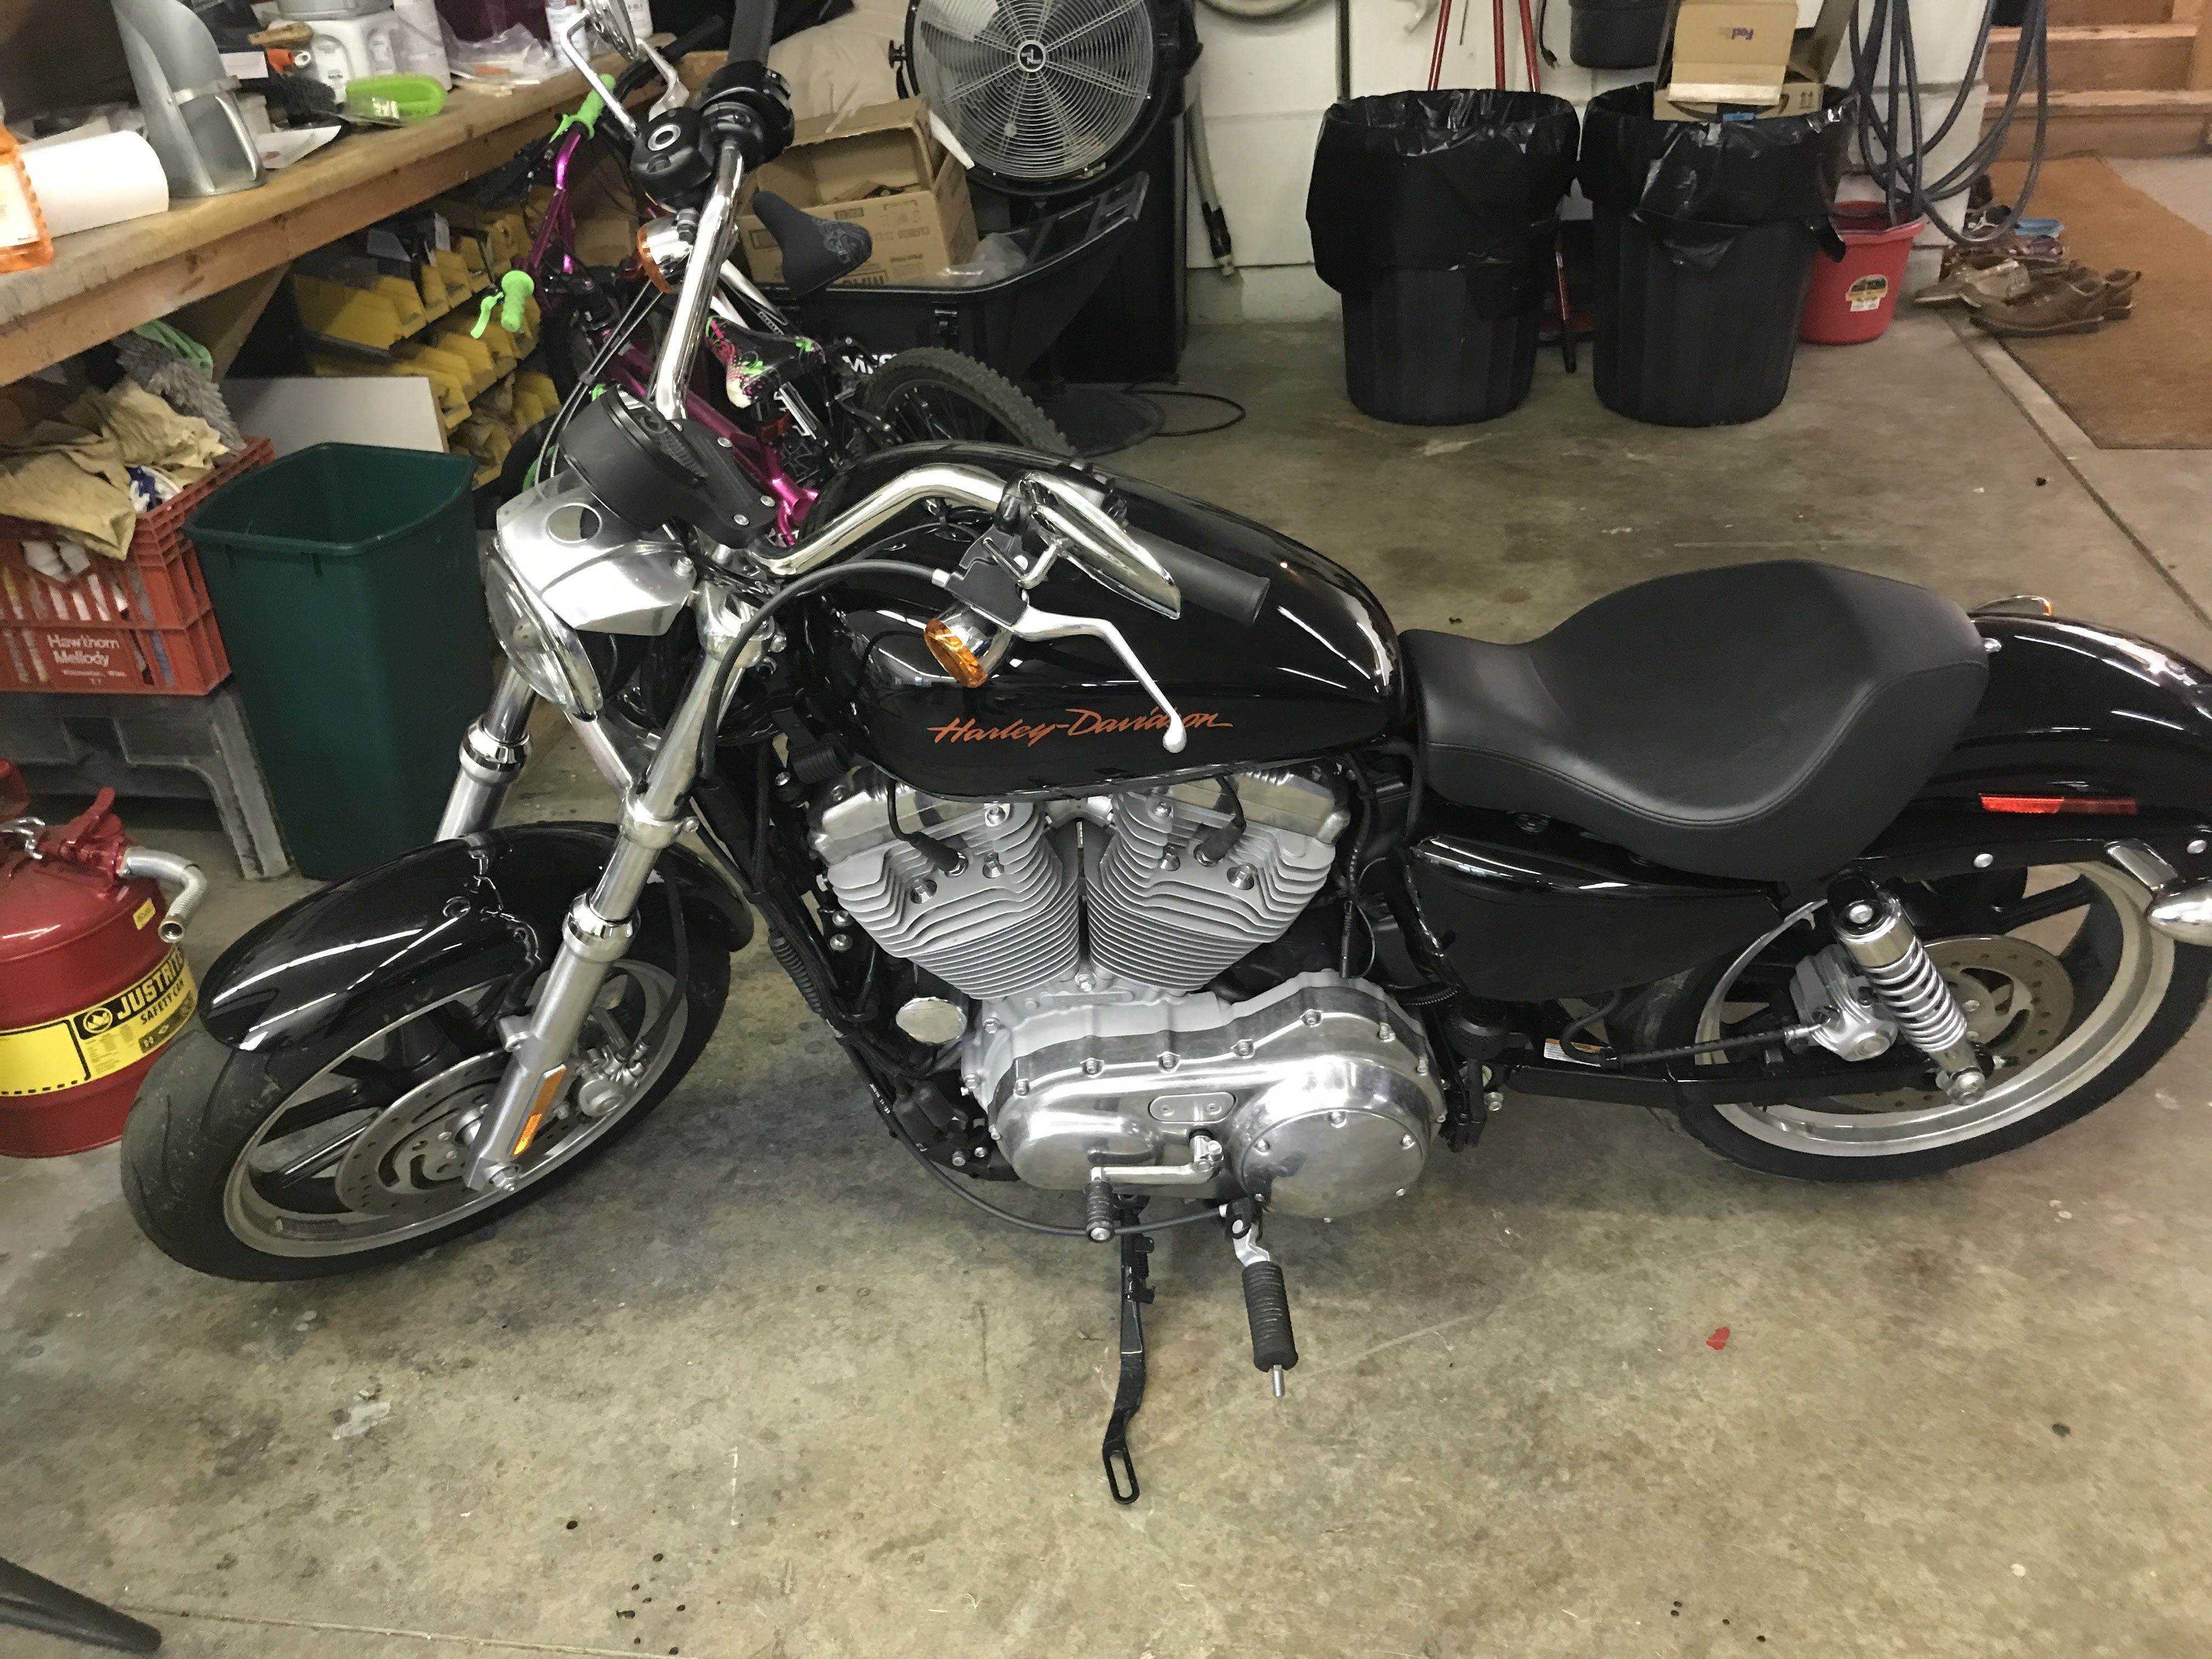 Harley Davidson Motorcycles For Sale 27187 Bikes Page 1